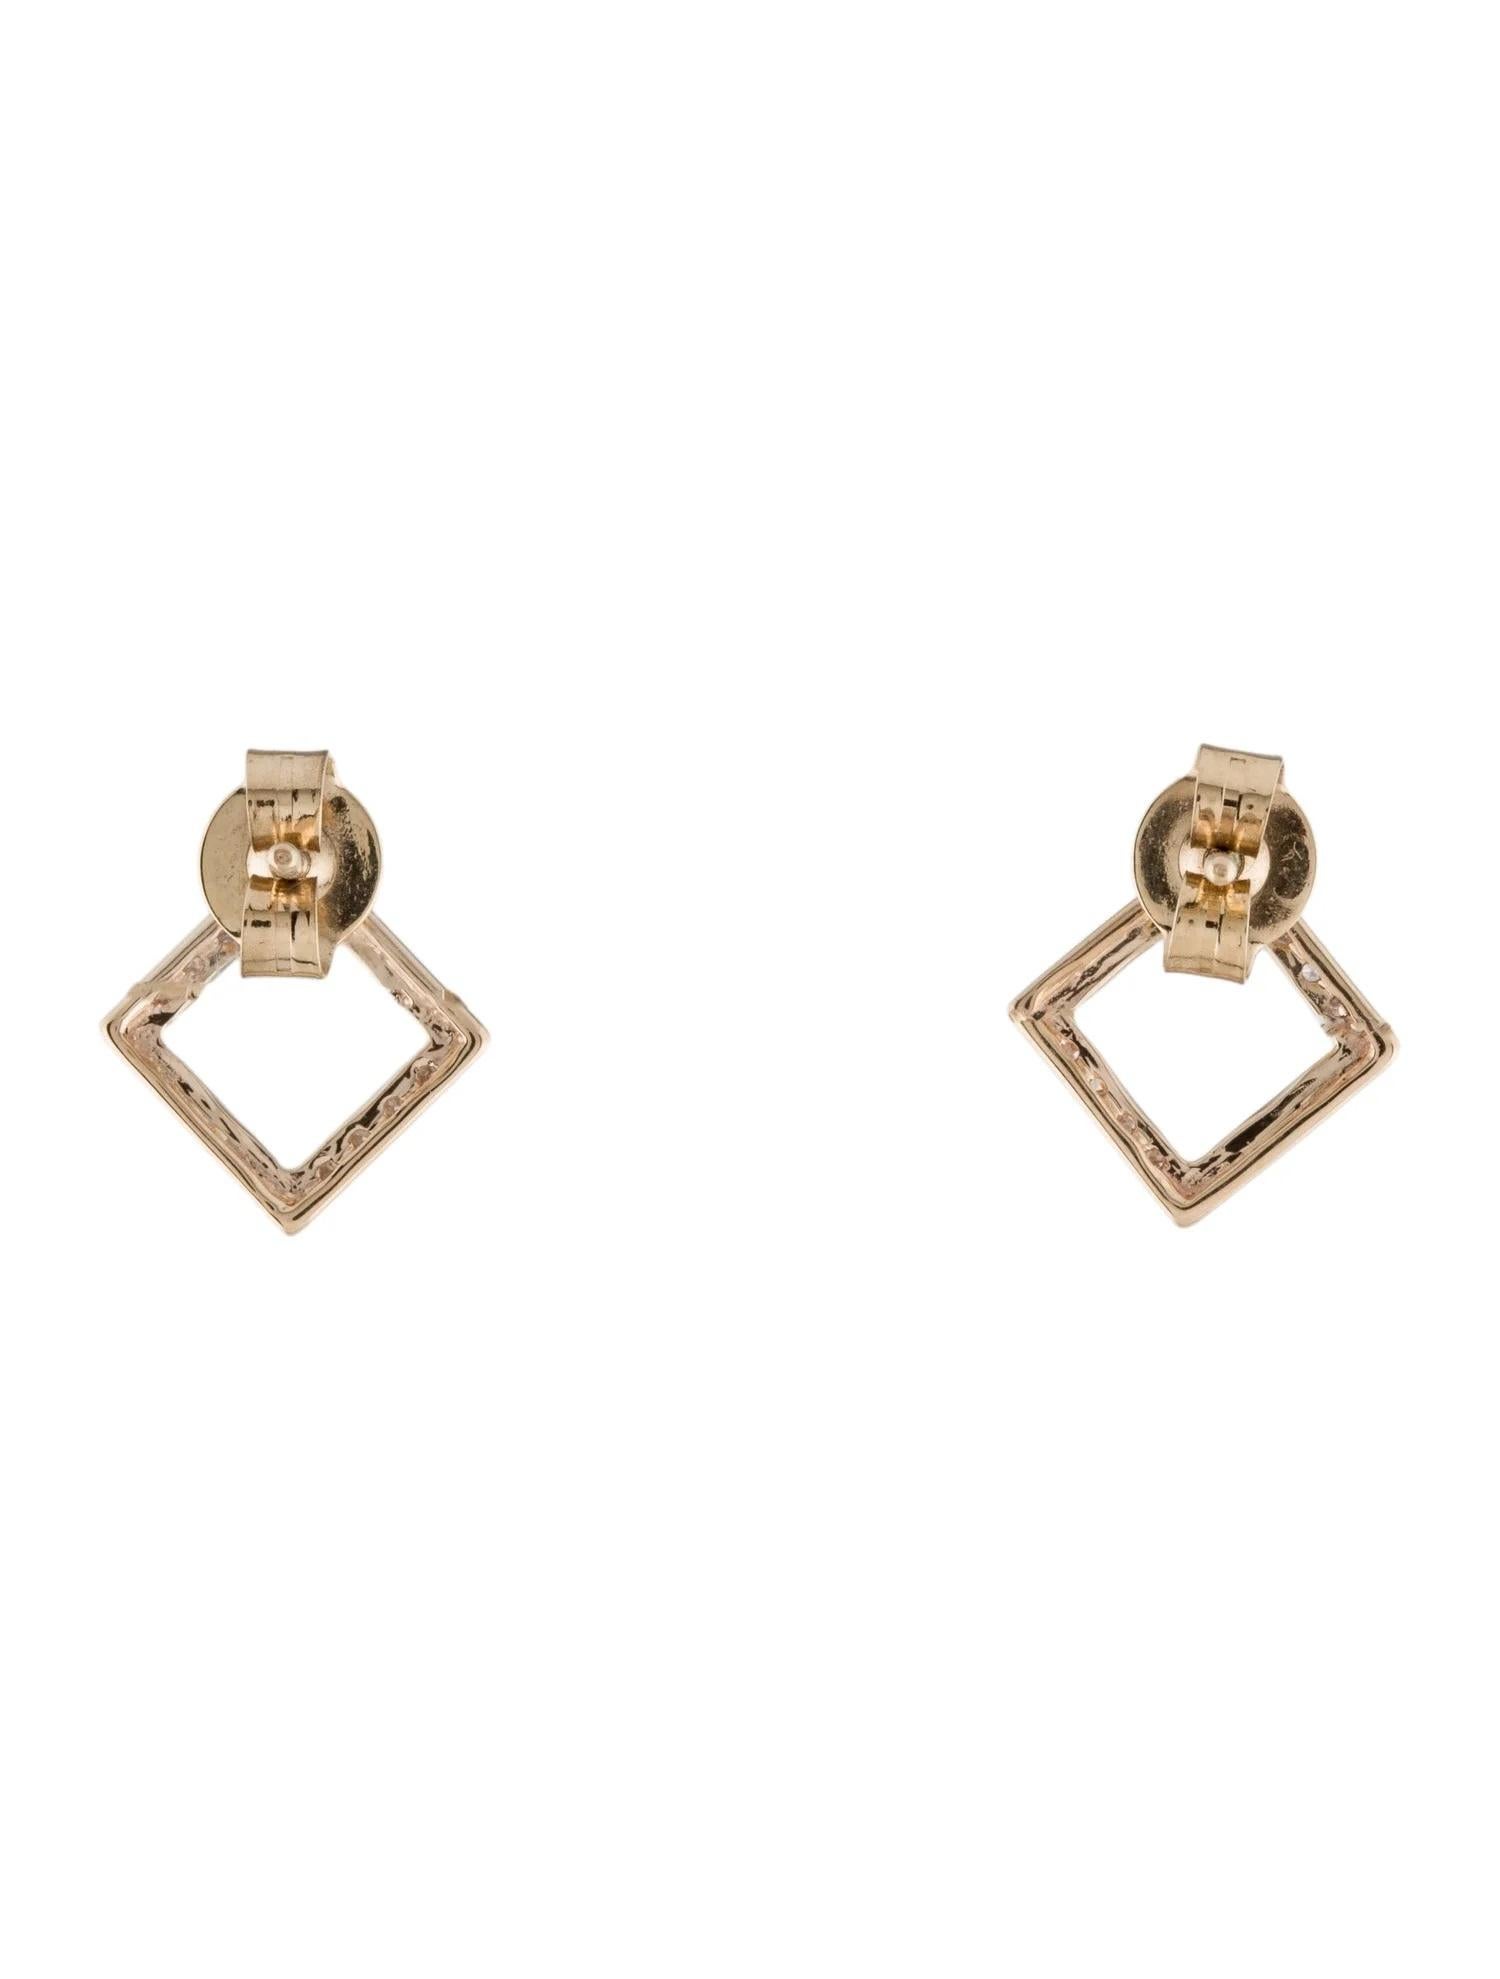 Elevate your look with these chic and versatile 14K Diamond Open Square Stud Earrings. Crafted in elegant yellow gold, these earrings feature a modern open square design that adds a contemporary touch to any outfit. Each earring is adorned with 16